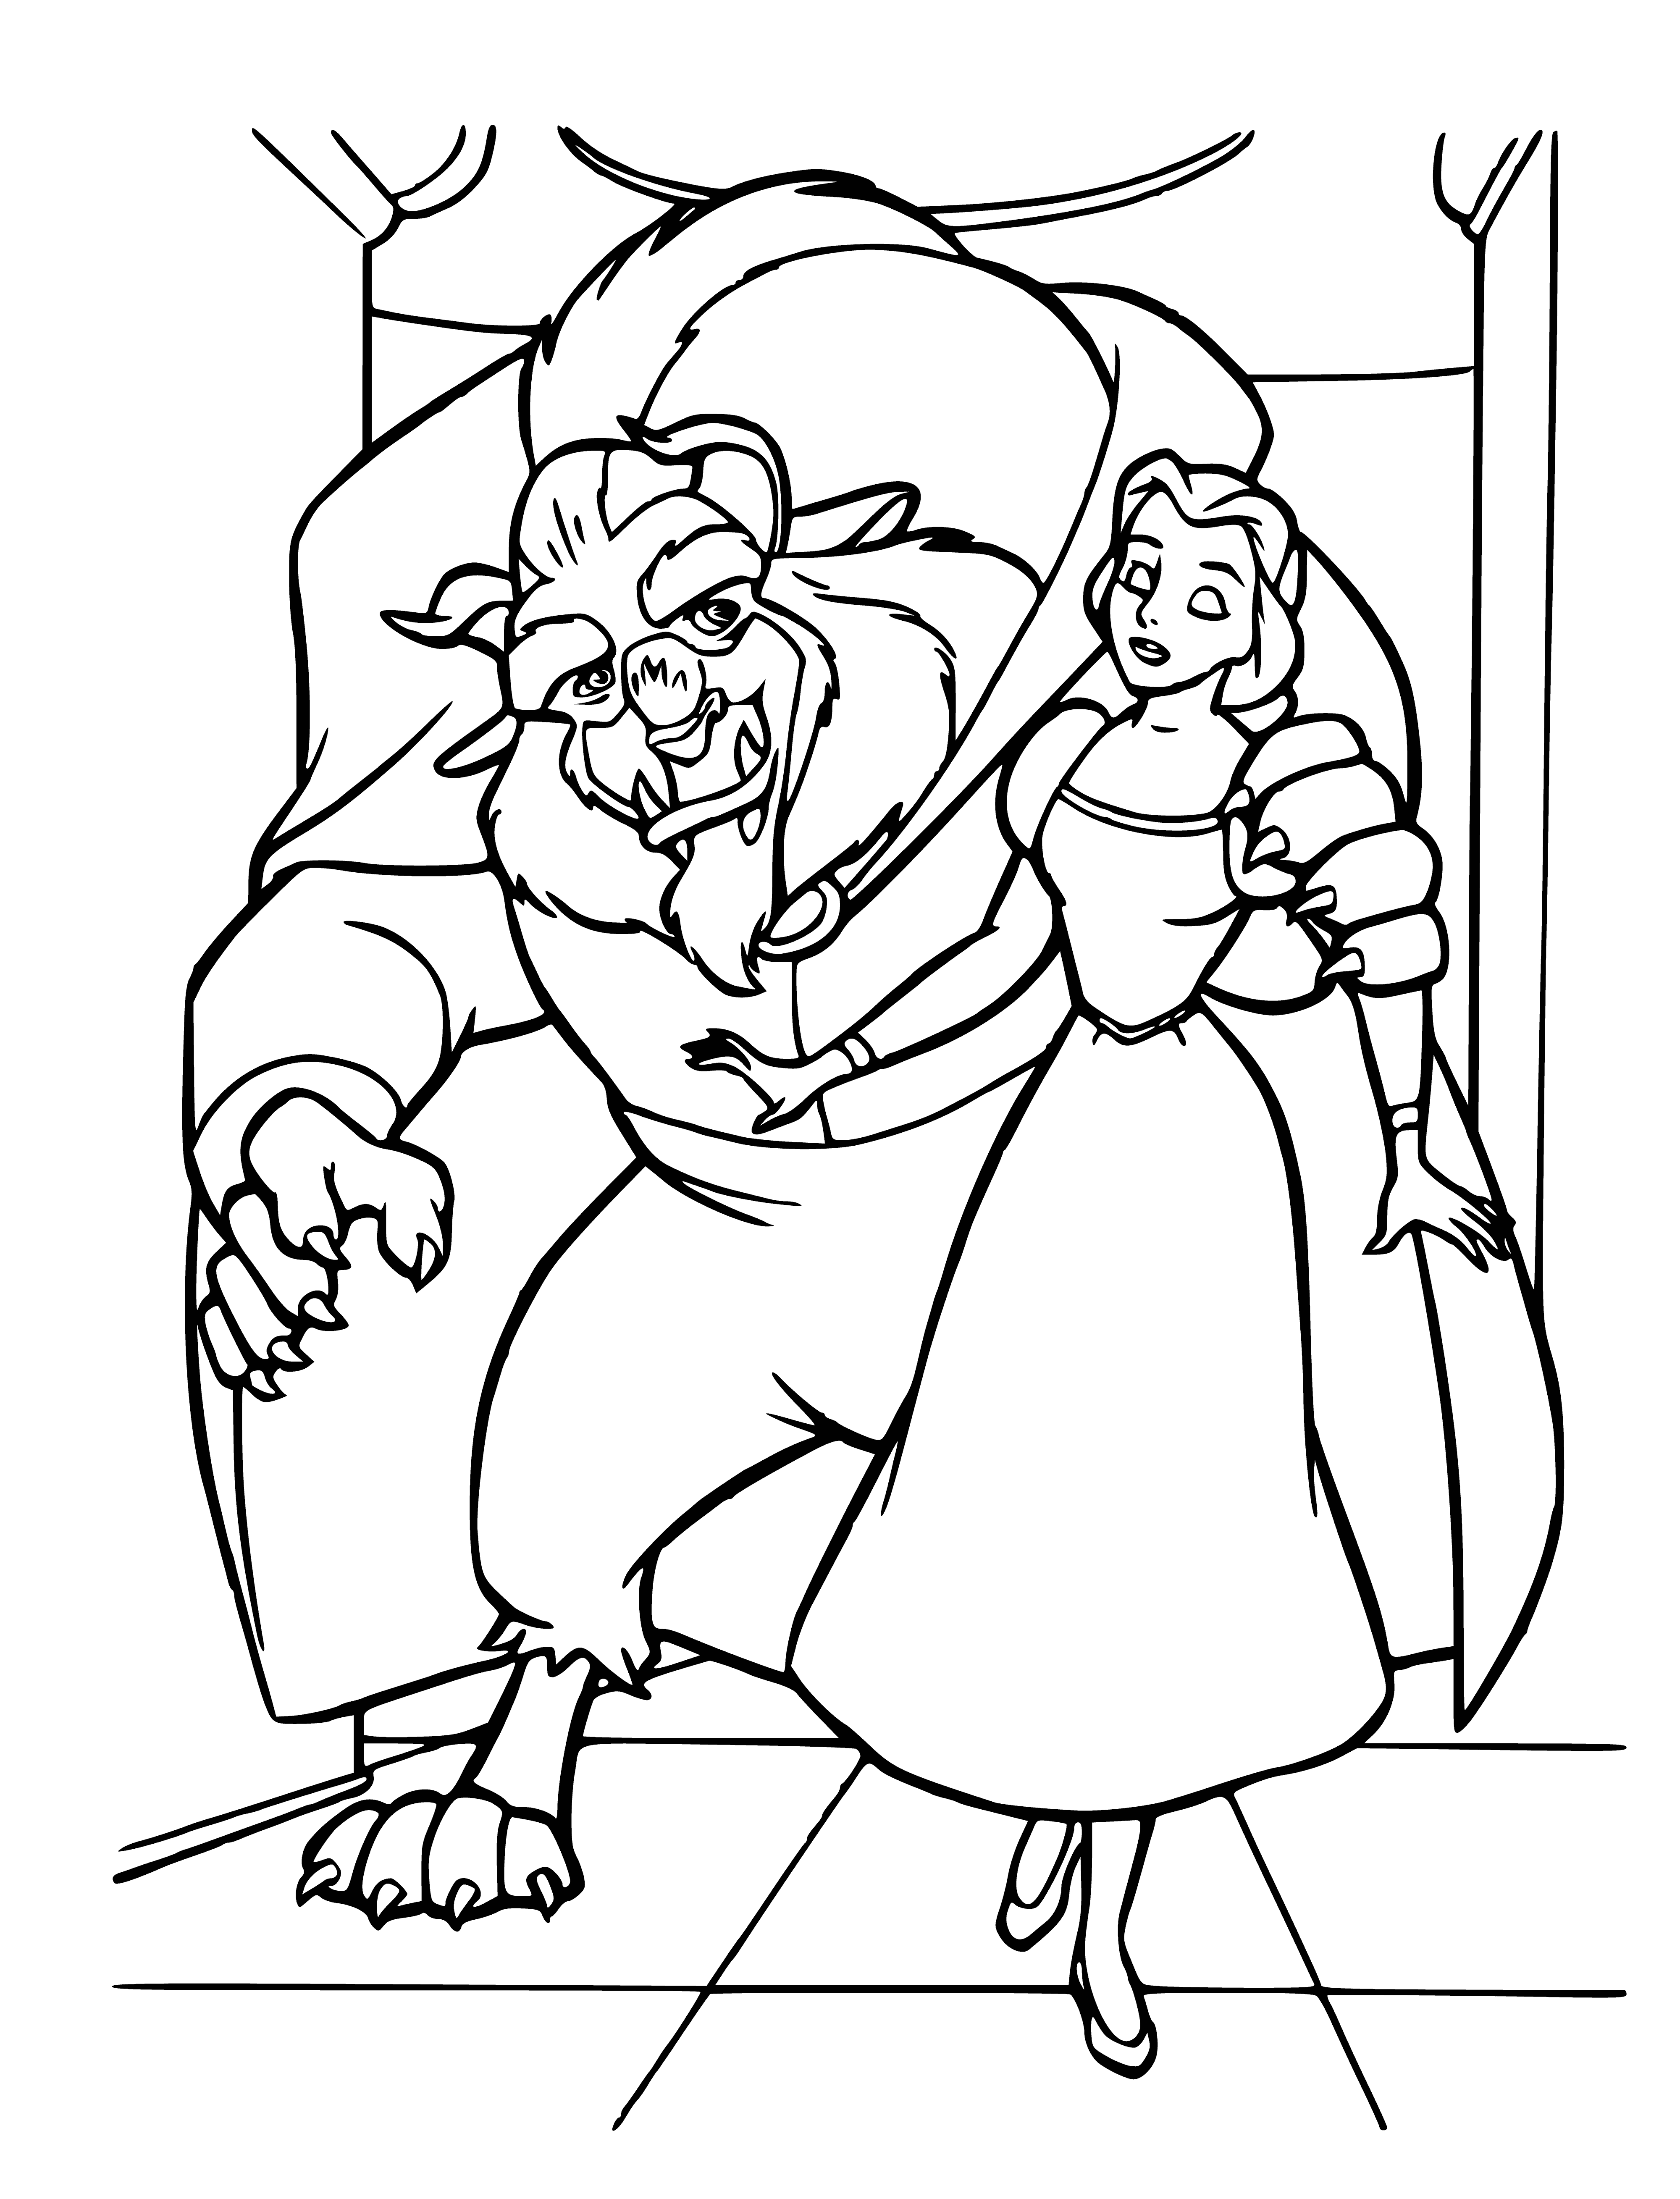 Belle and the Beast coloring page